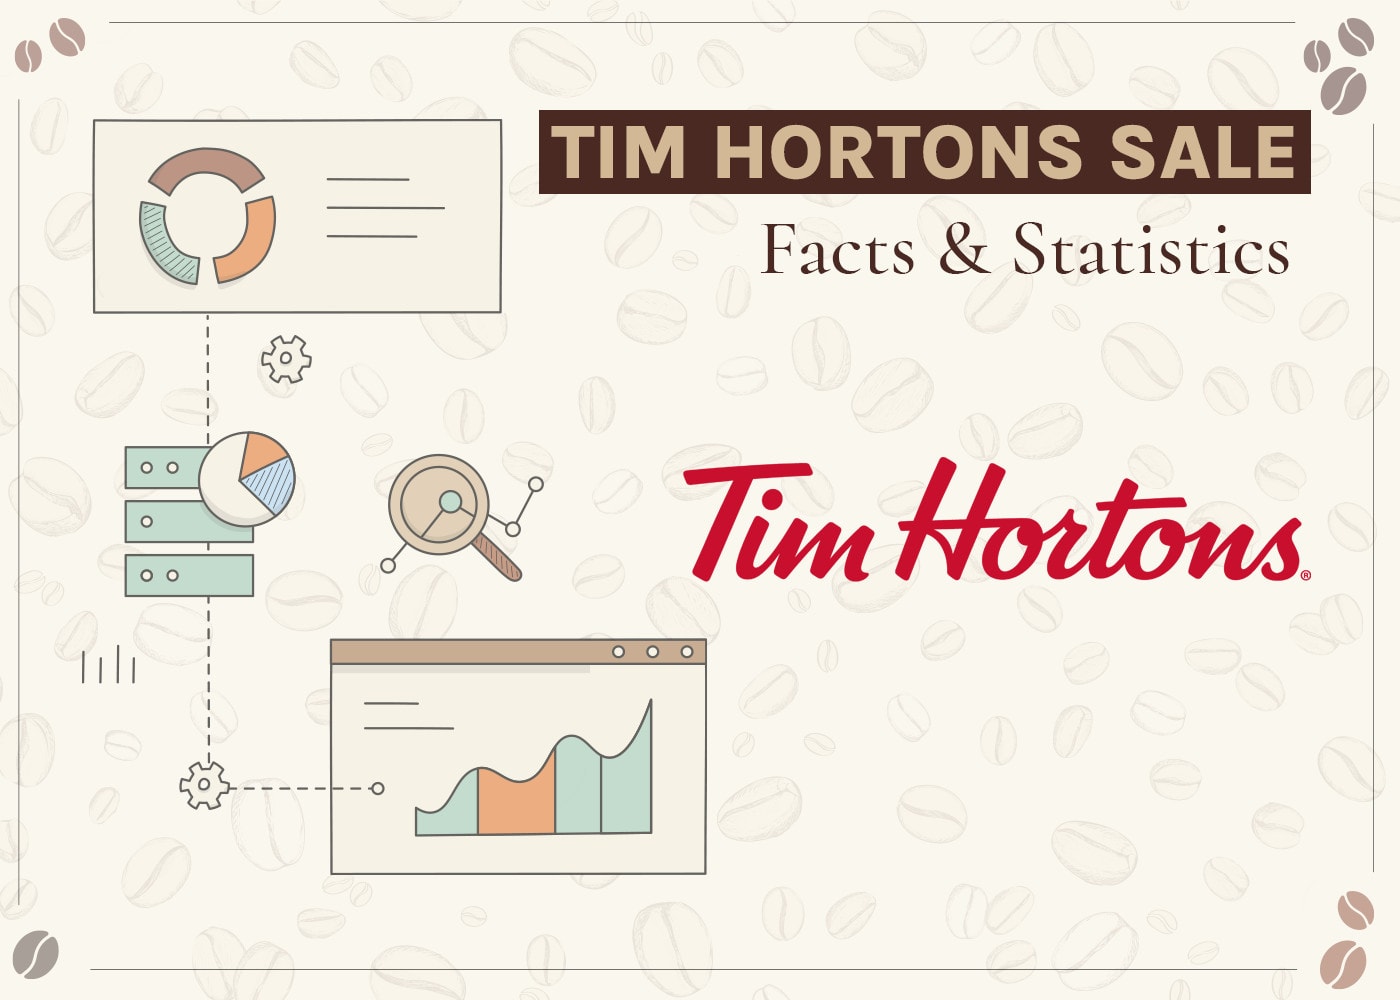 Tim Hortons Sales Statistics & Facts to Know